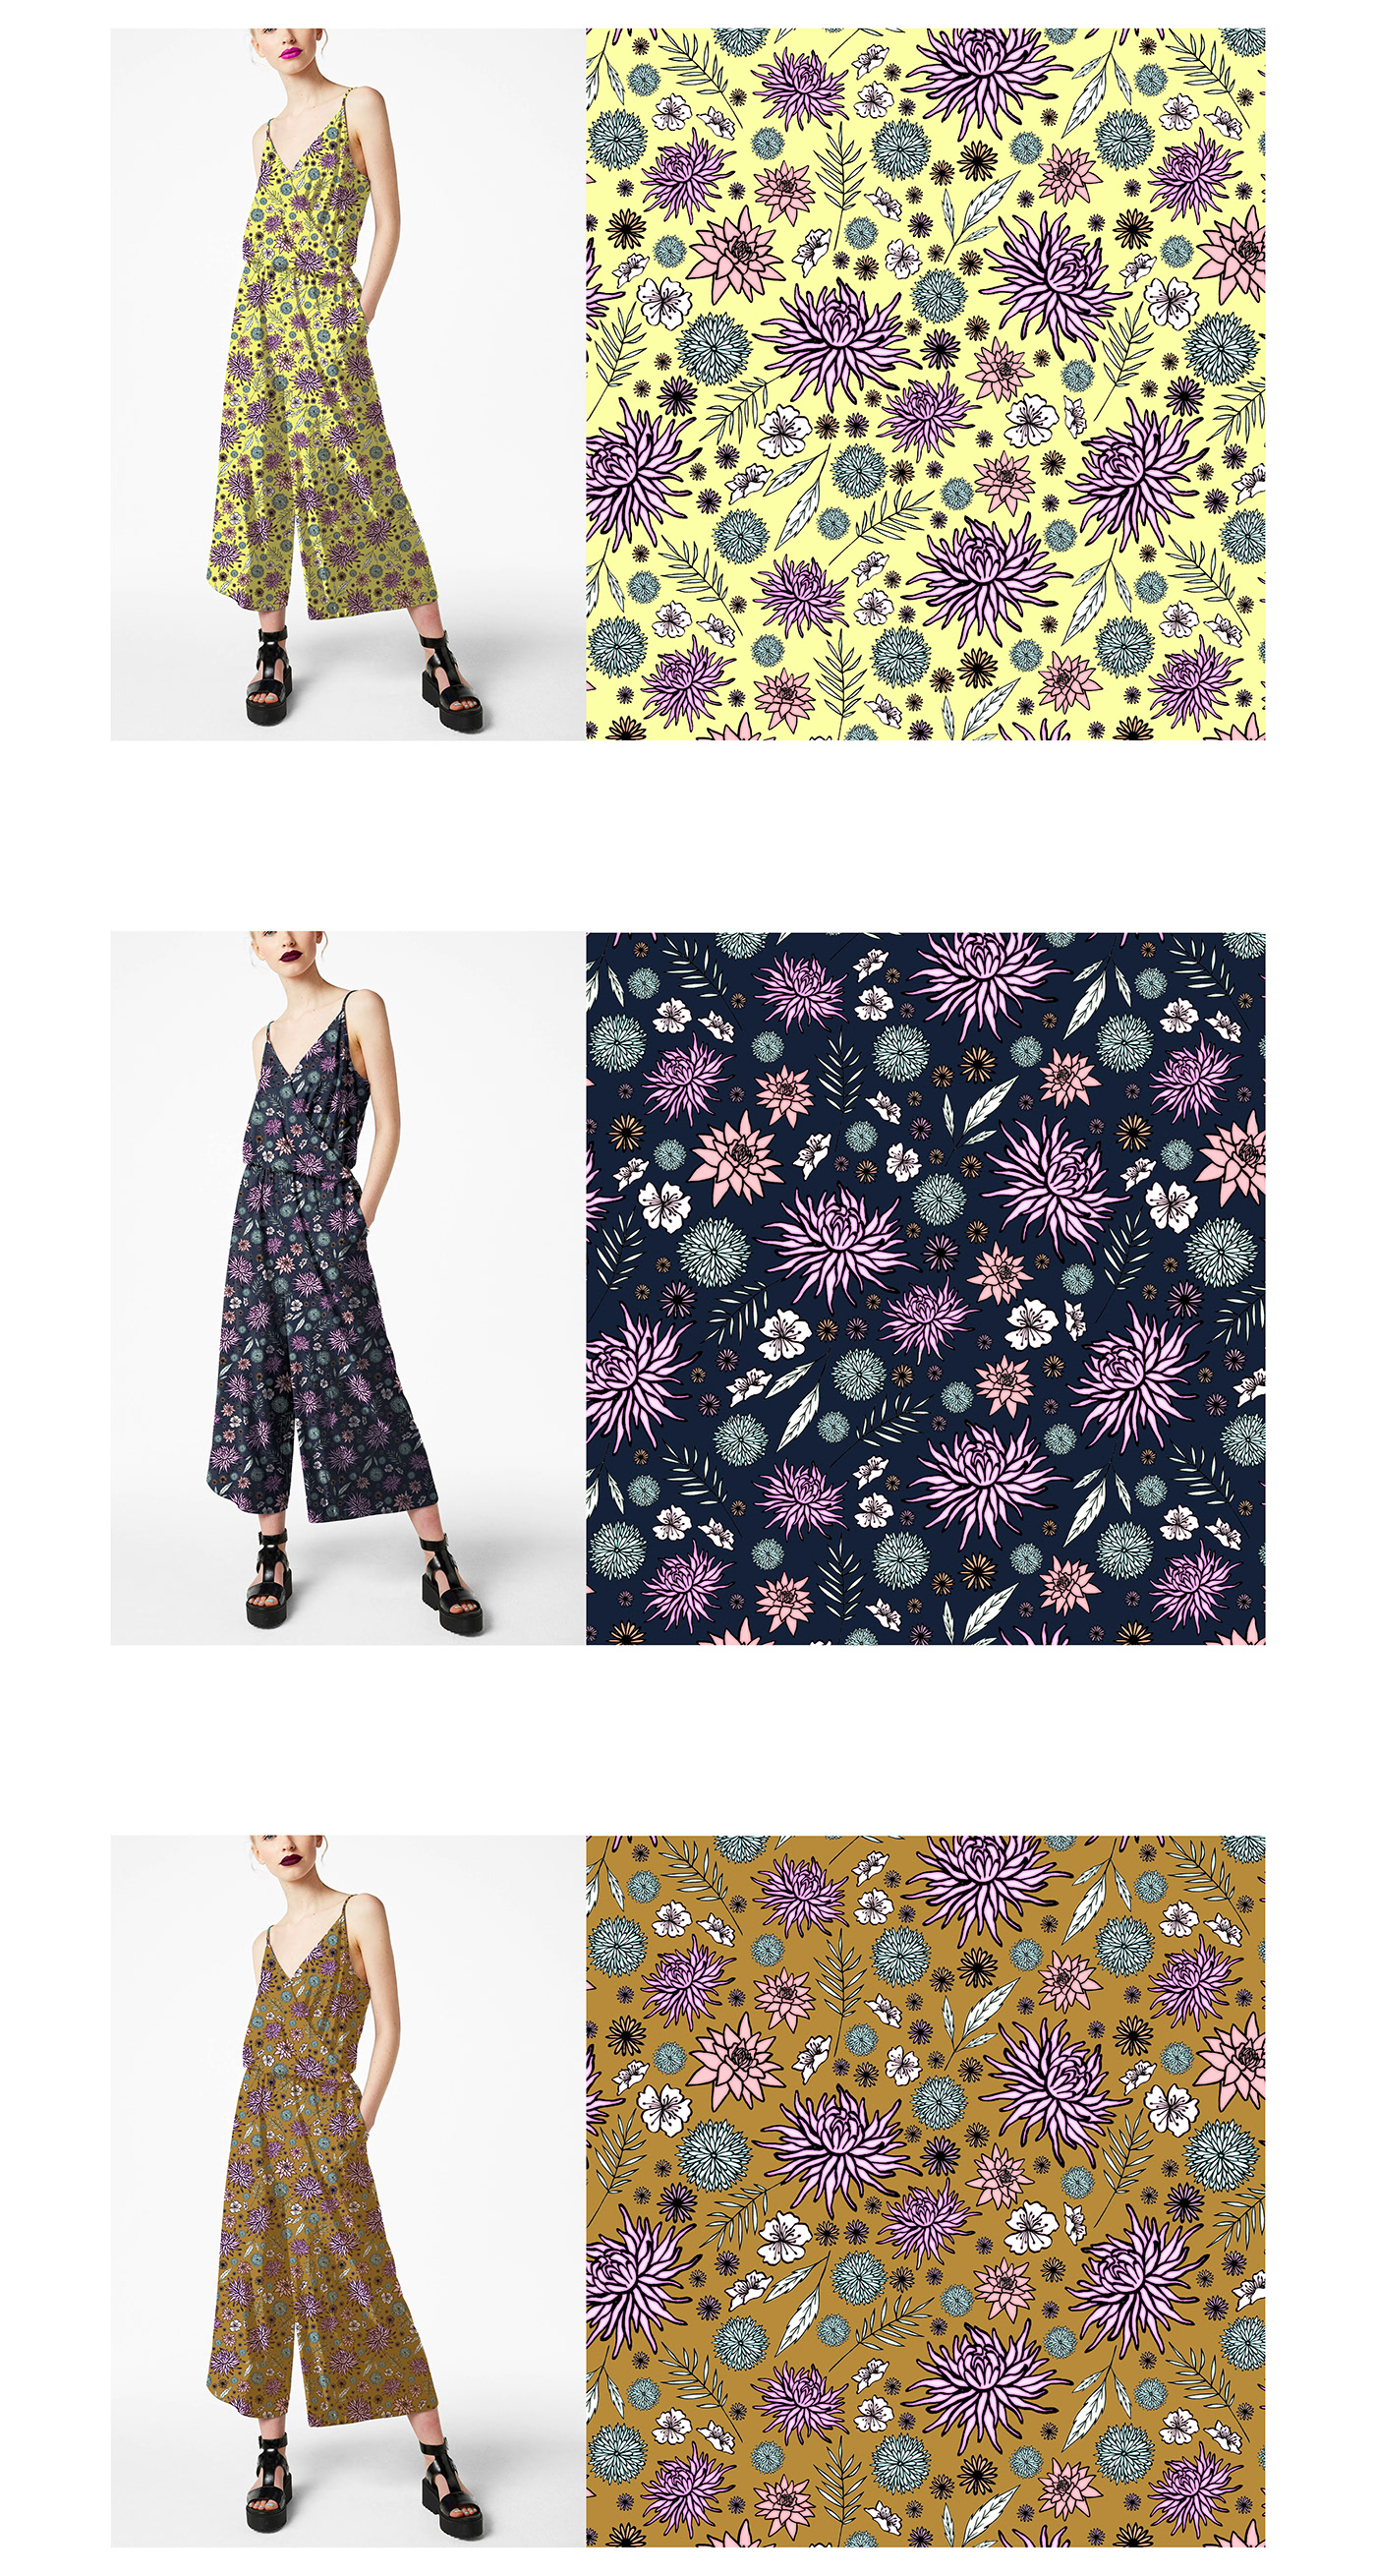 patterndesign Patterns textile Fashion  textiledesign Drawing  handdrawing florals japanesse oriental